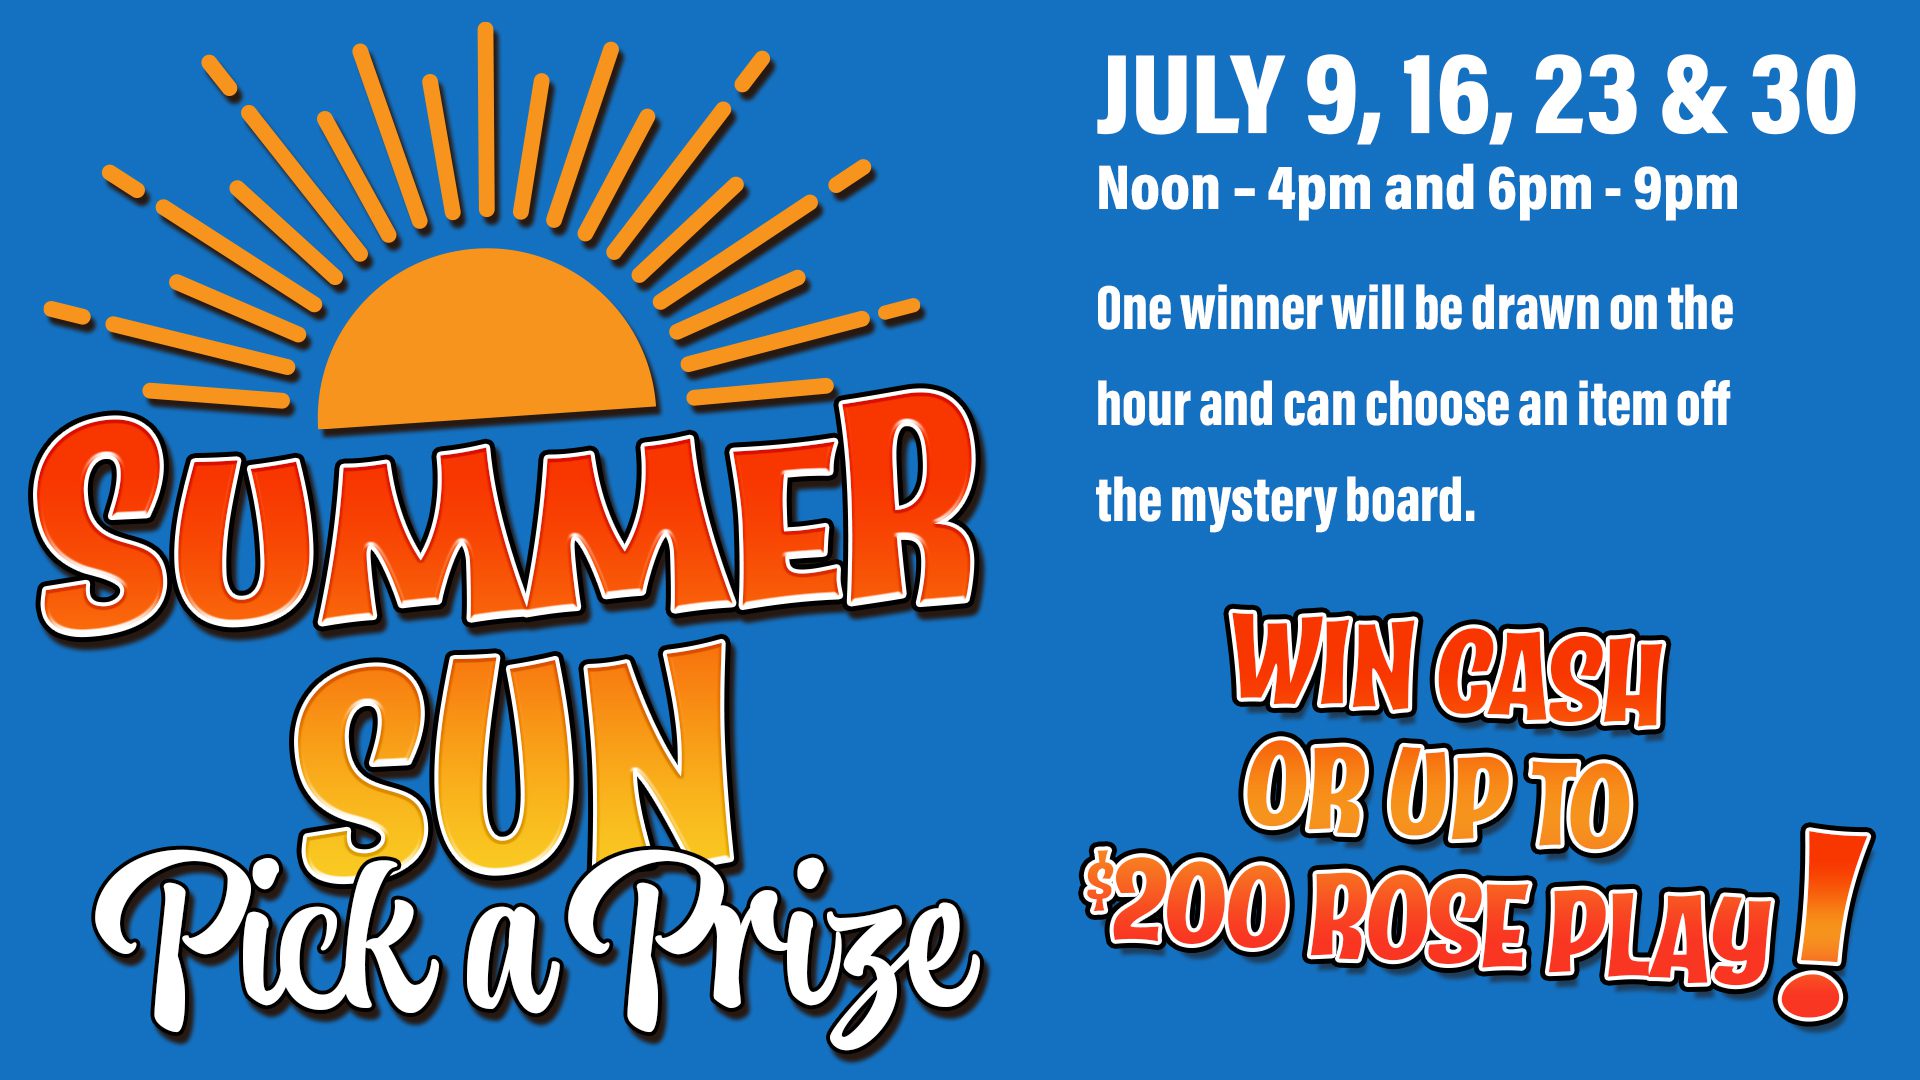 A blue banner with the words " summer fun on a prize."